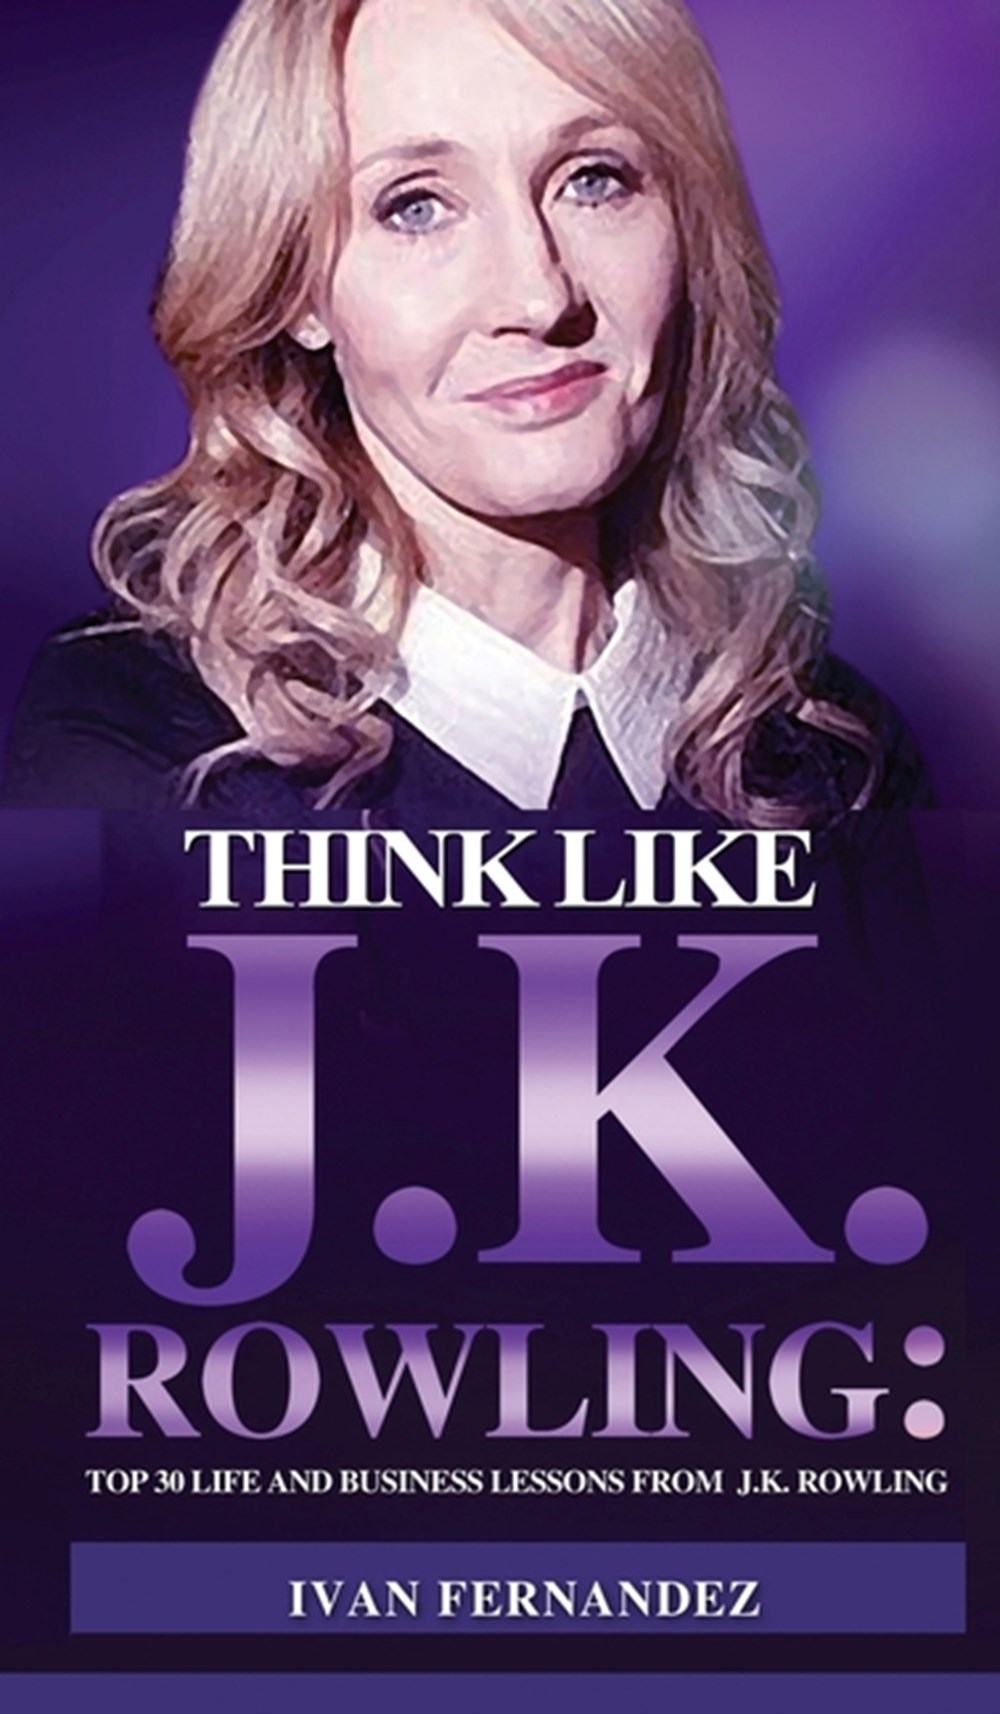 Think Like J.K. Rowling Top 30 Life and Business Lessons from J.K. Rowling